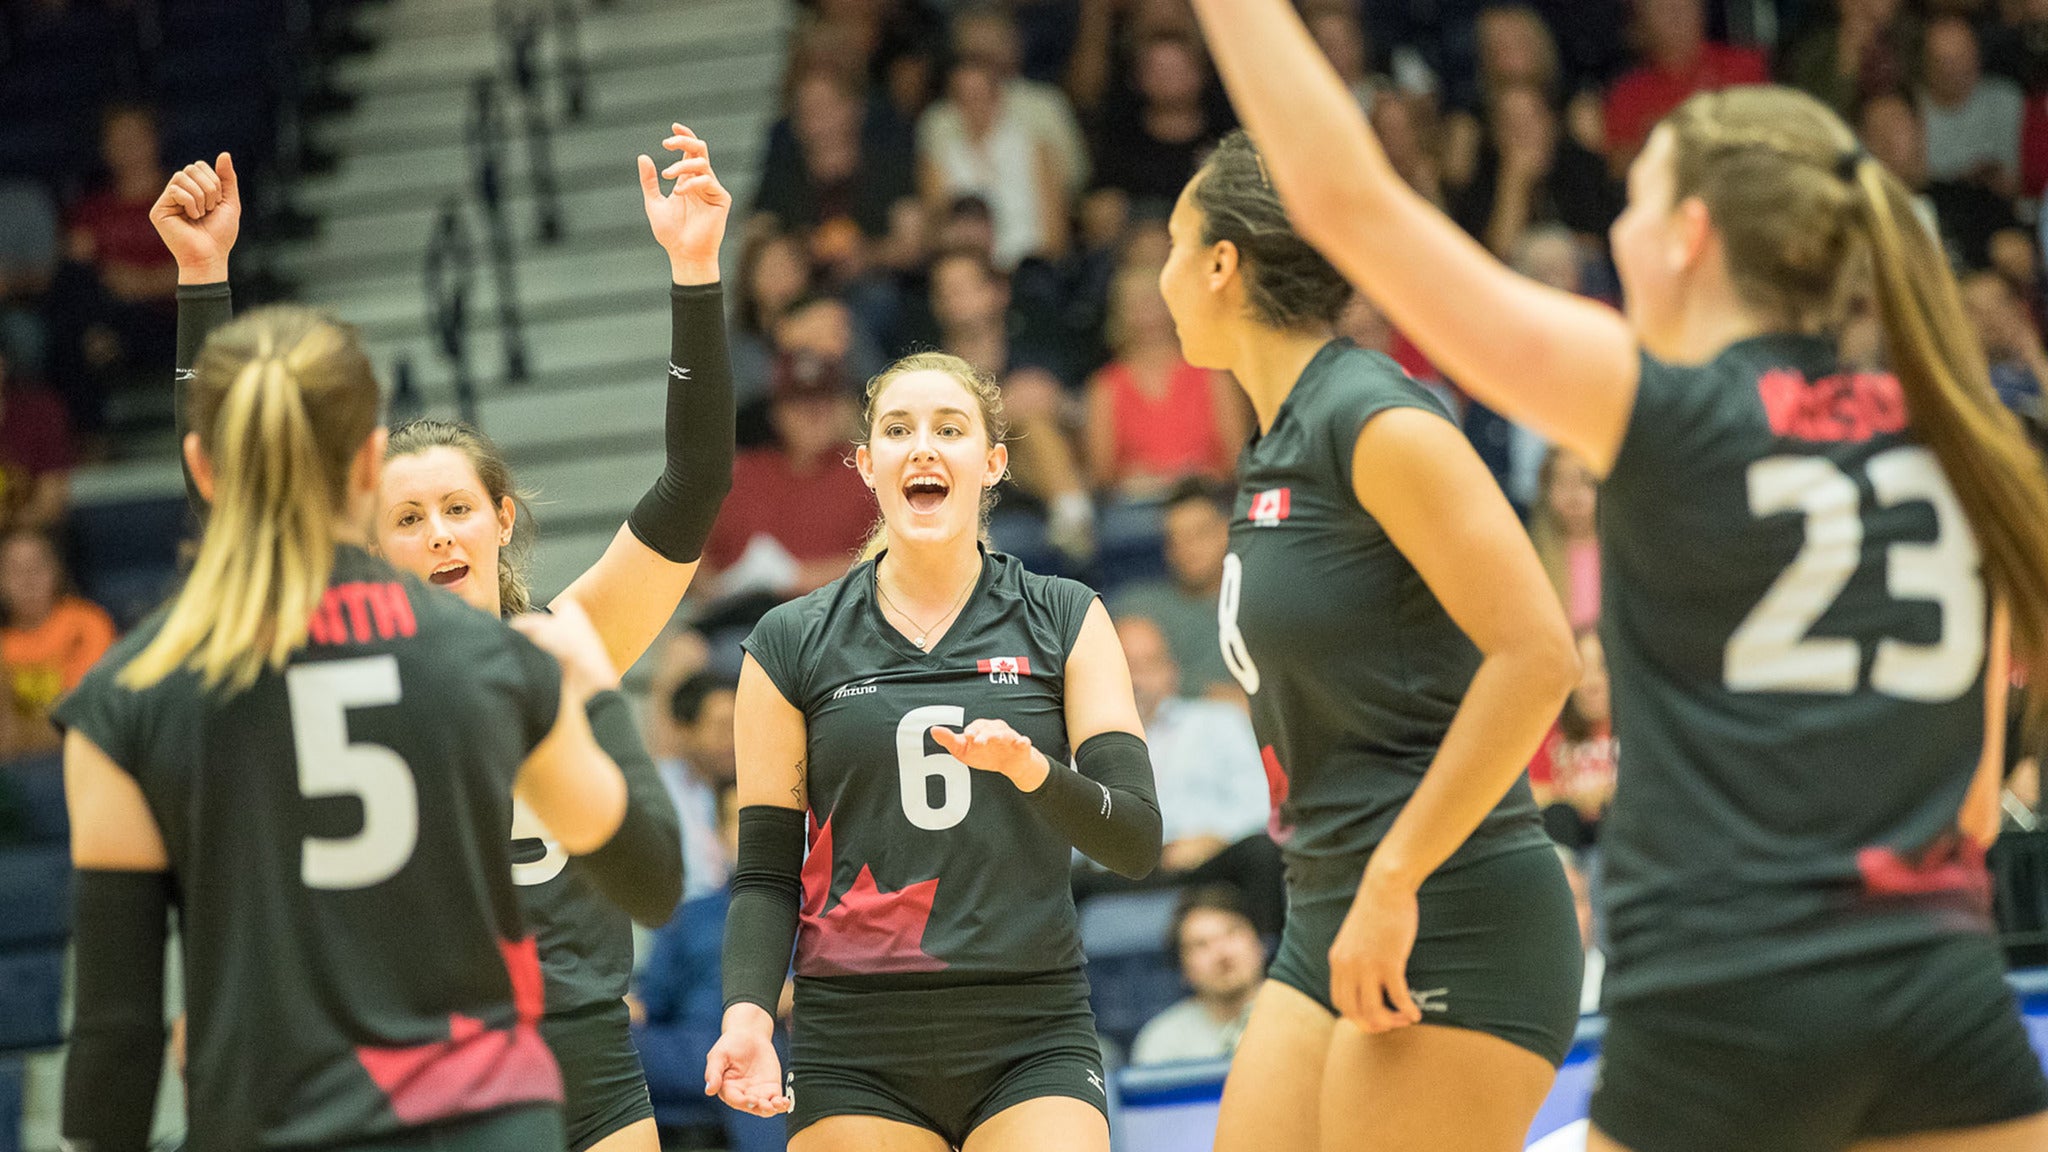 Volleyball Canada - Women's Finals Day Pass in Edmonton promo photo for Exclusive presale offer code